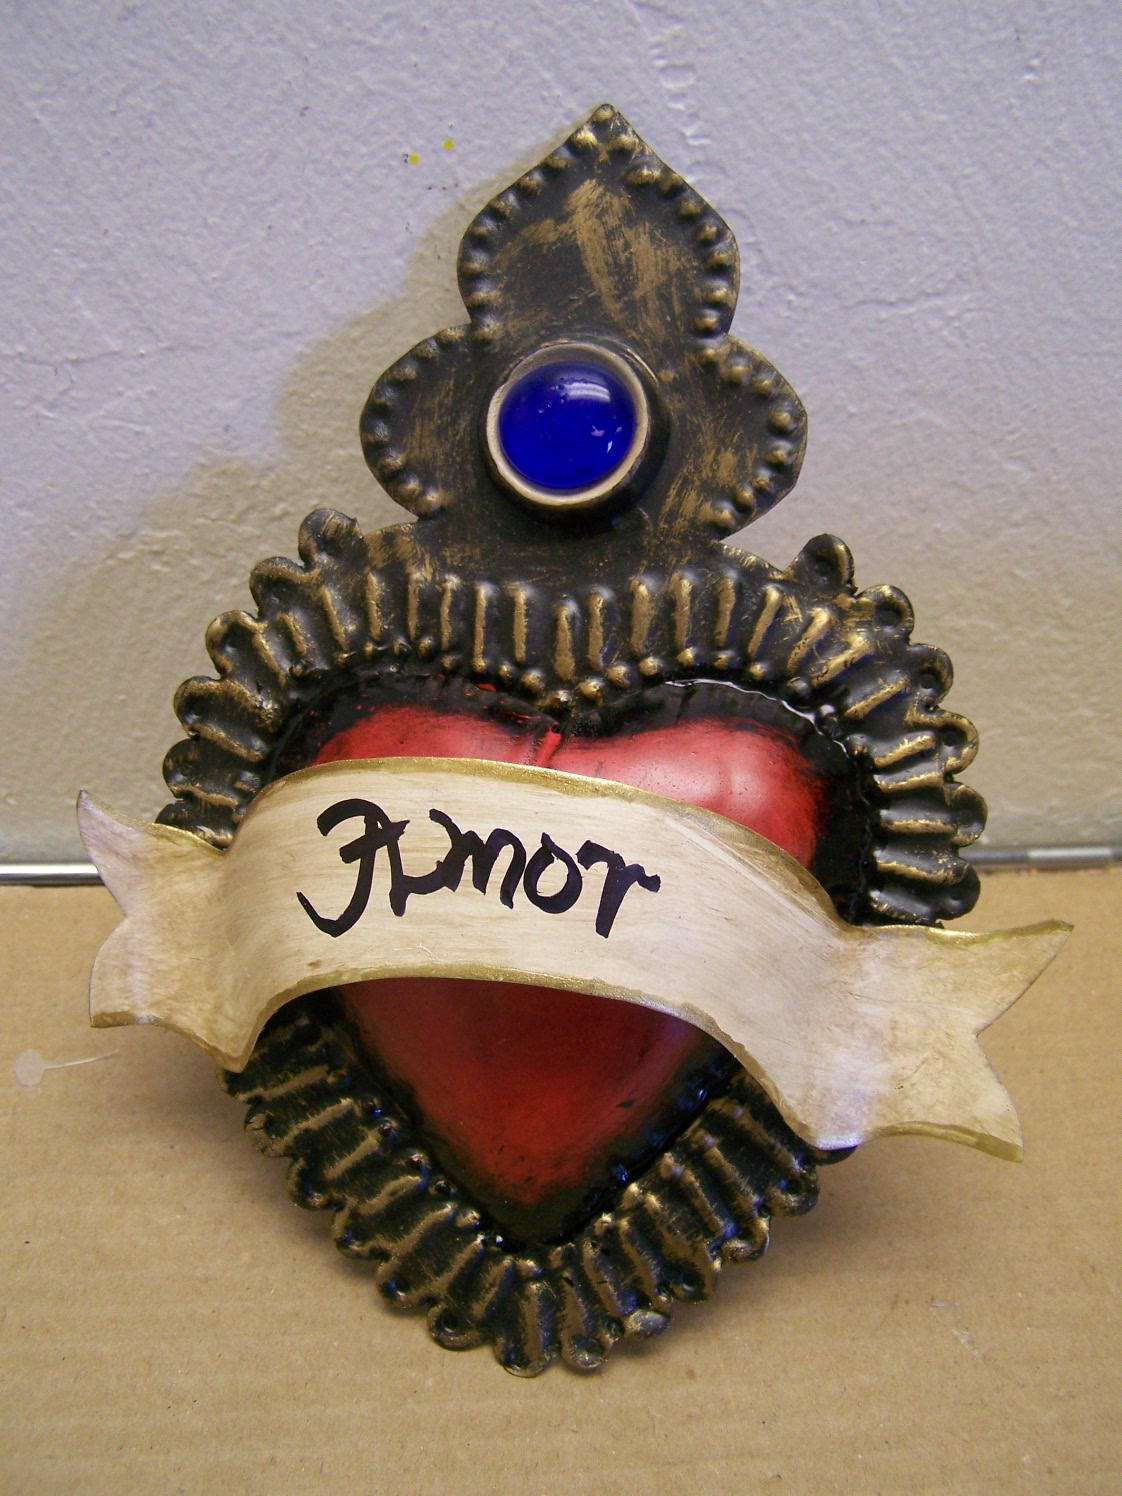 Painted 3D Tin Sacred Heart with Banner "Amor" (Love) - Mexico